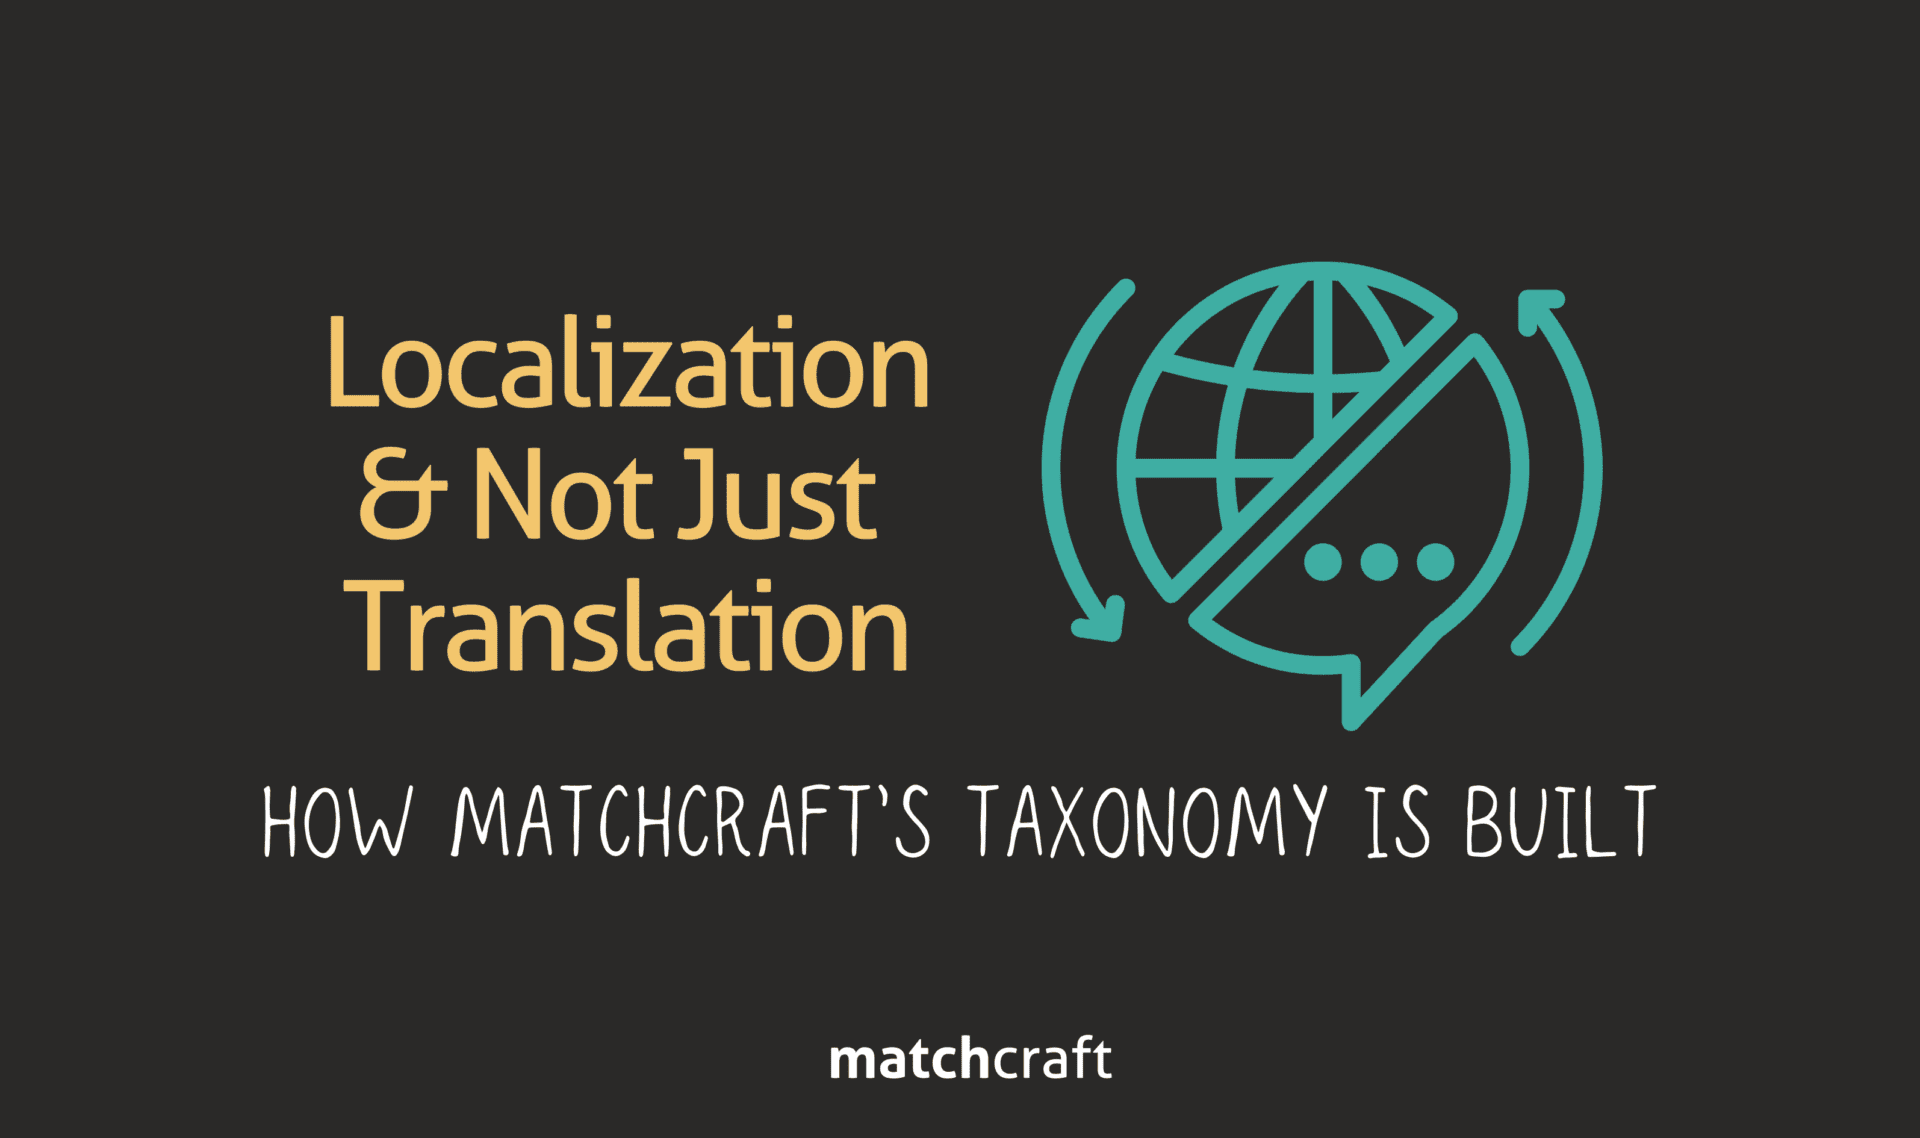 Localization & Not Just Translation – How MatchCraft’s Taxonomy Is Built